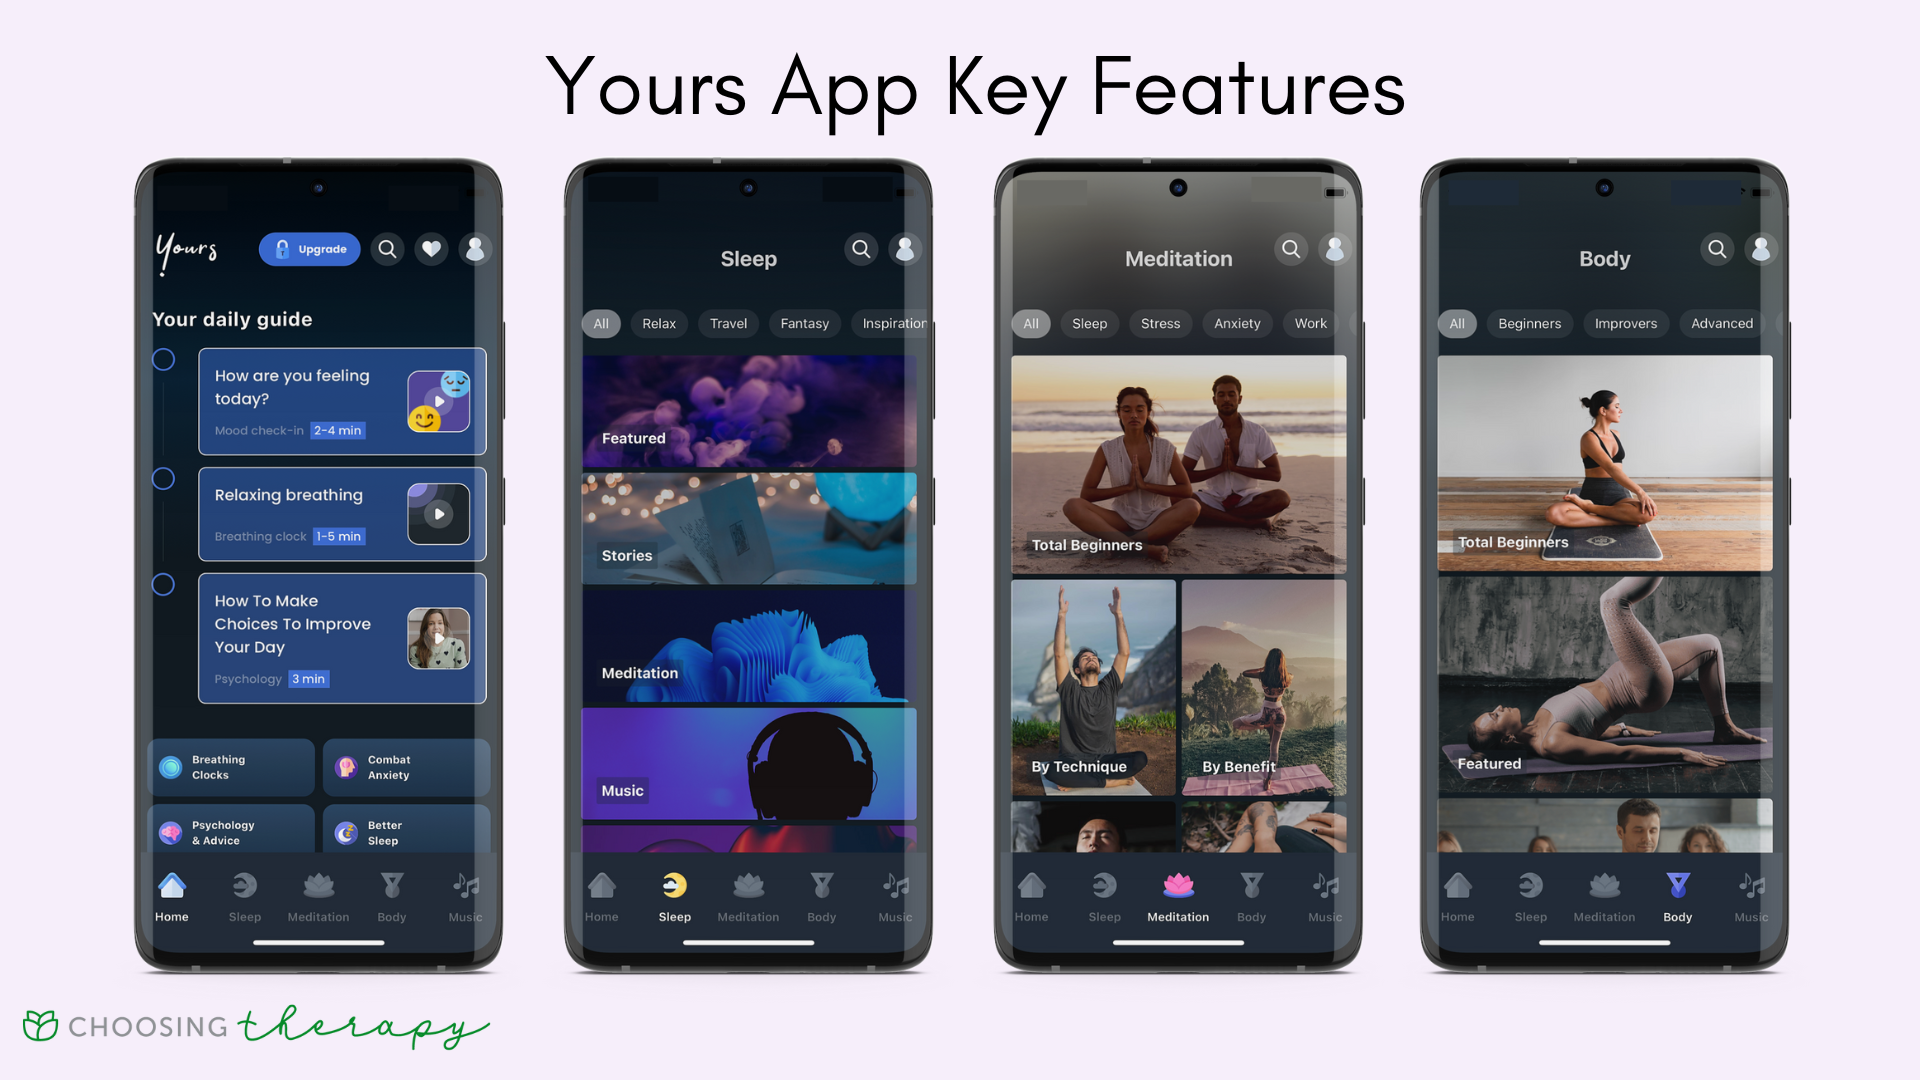 Yours App - Image of the key features in the Yours app, image of home screen, sleep meditations, meditation courses, and yoga classes